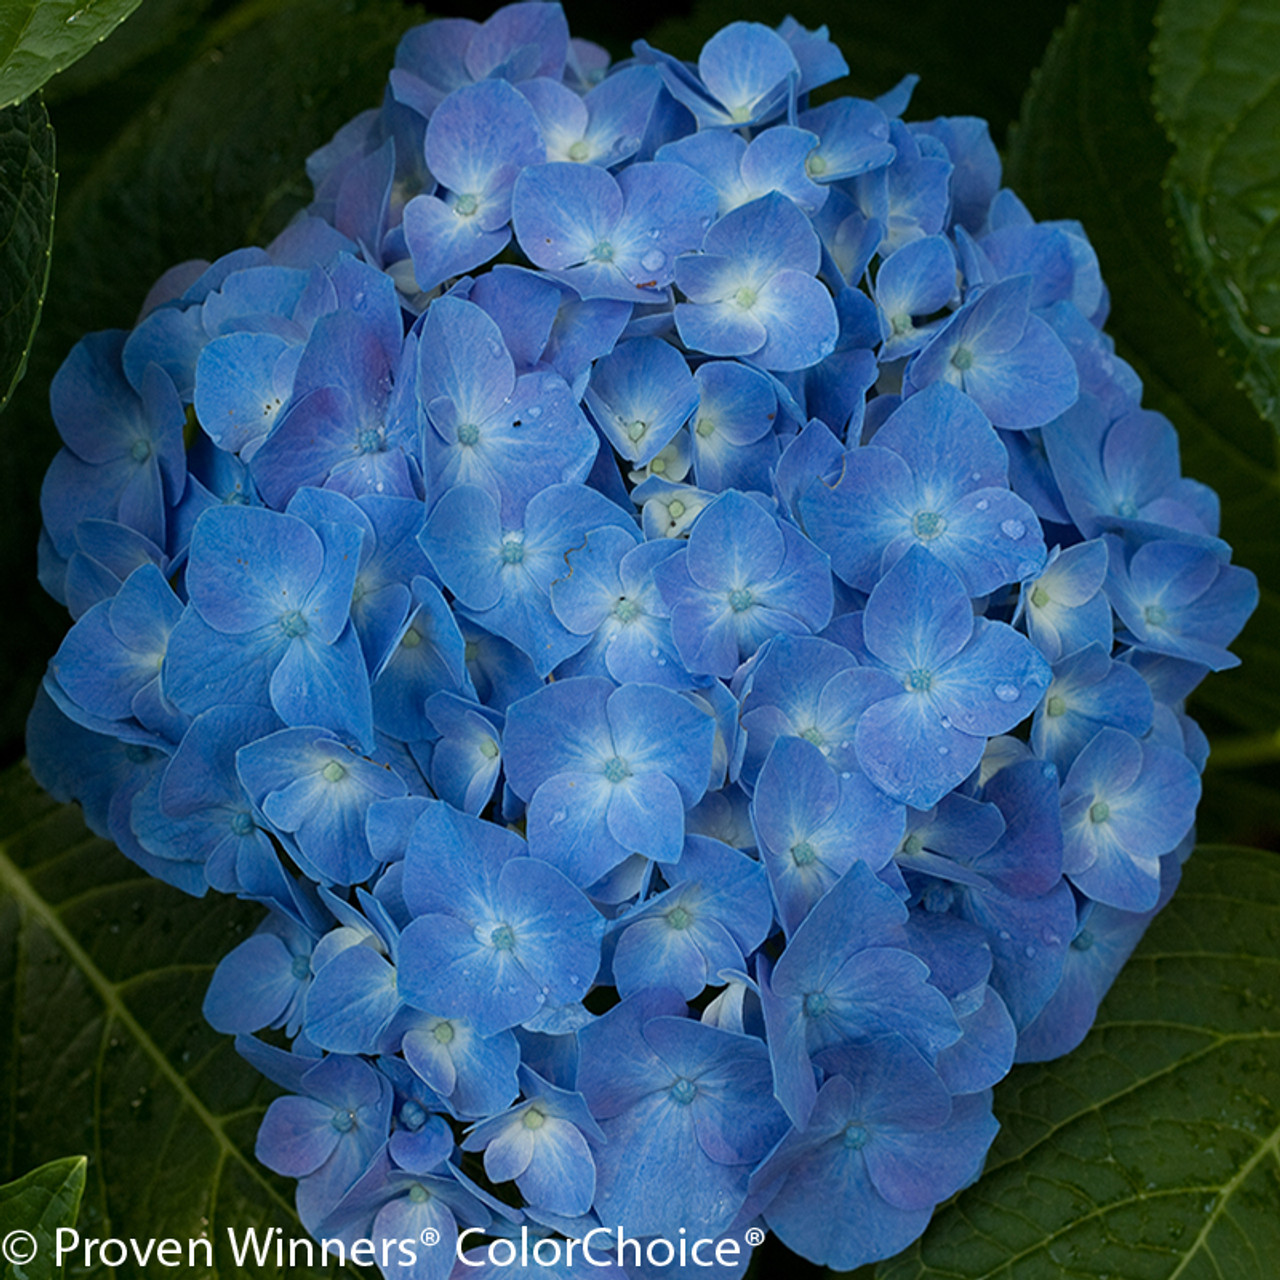 Image of Close-up of a blue jangles hydrangea flower